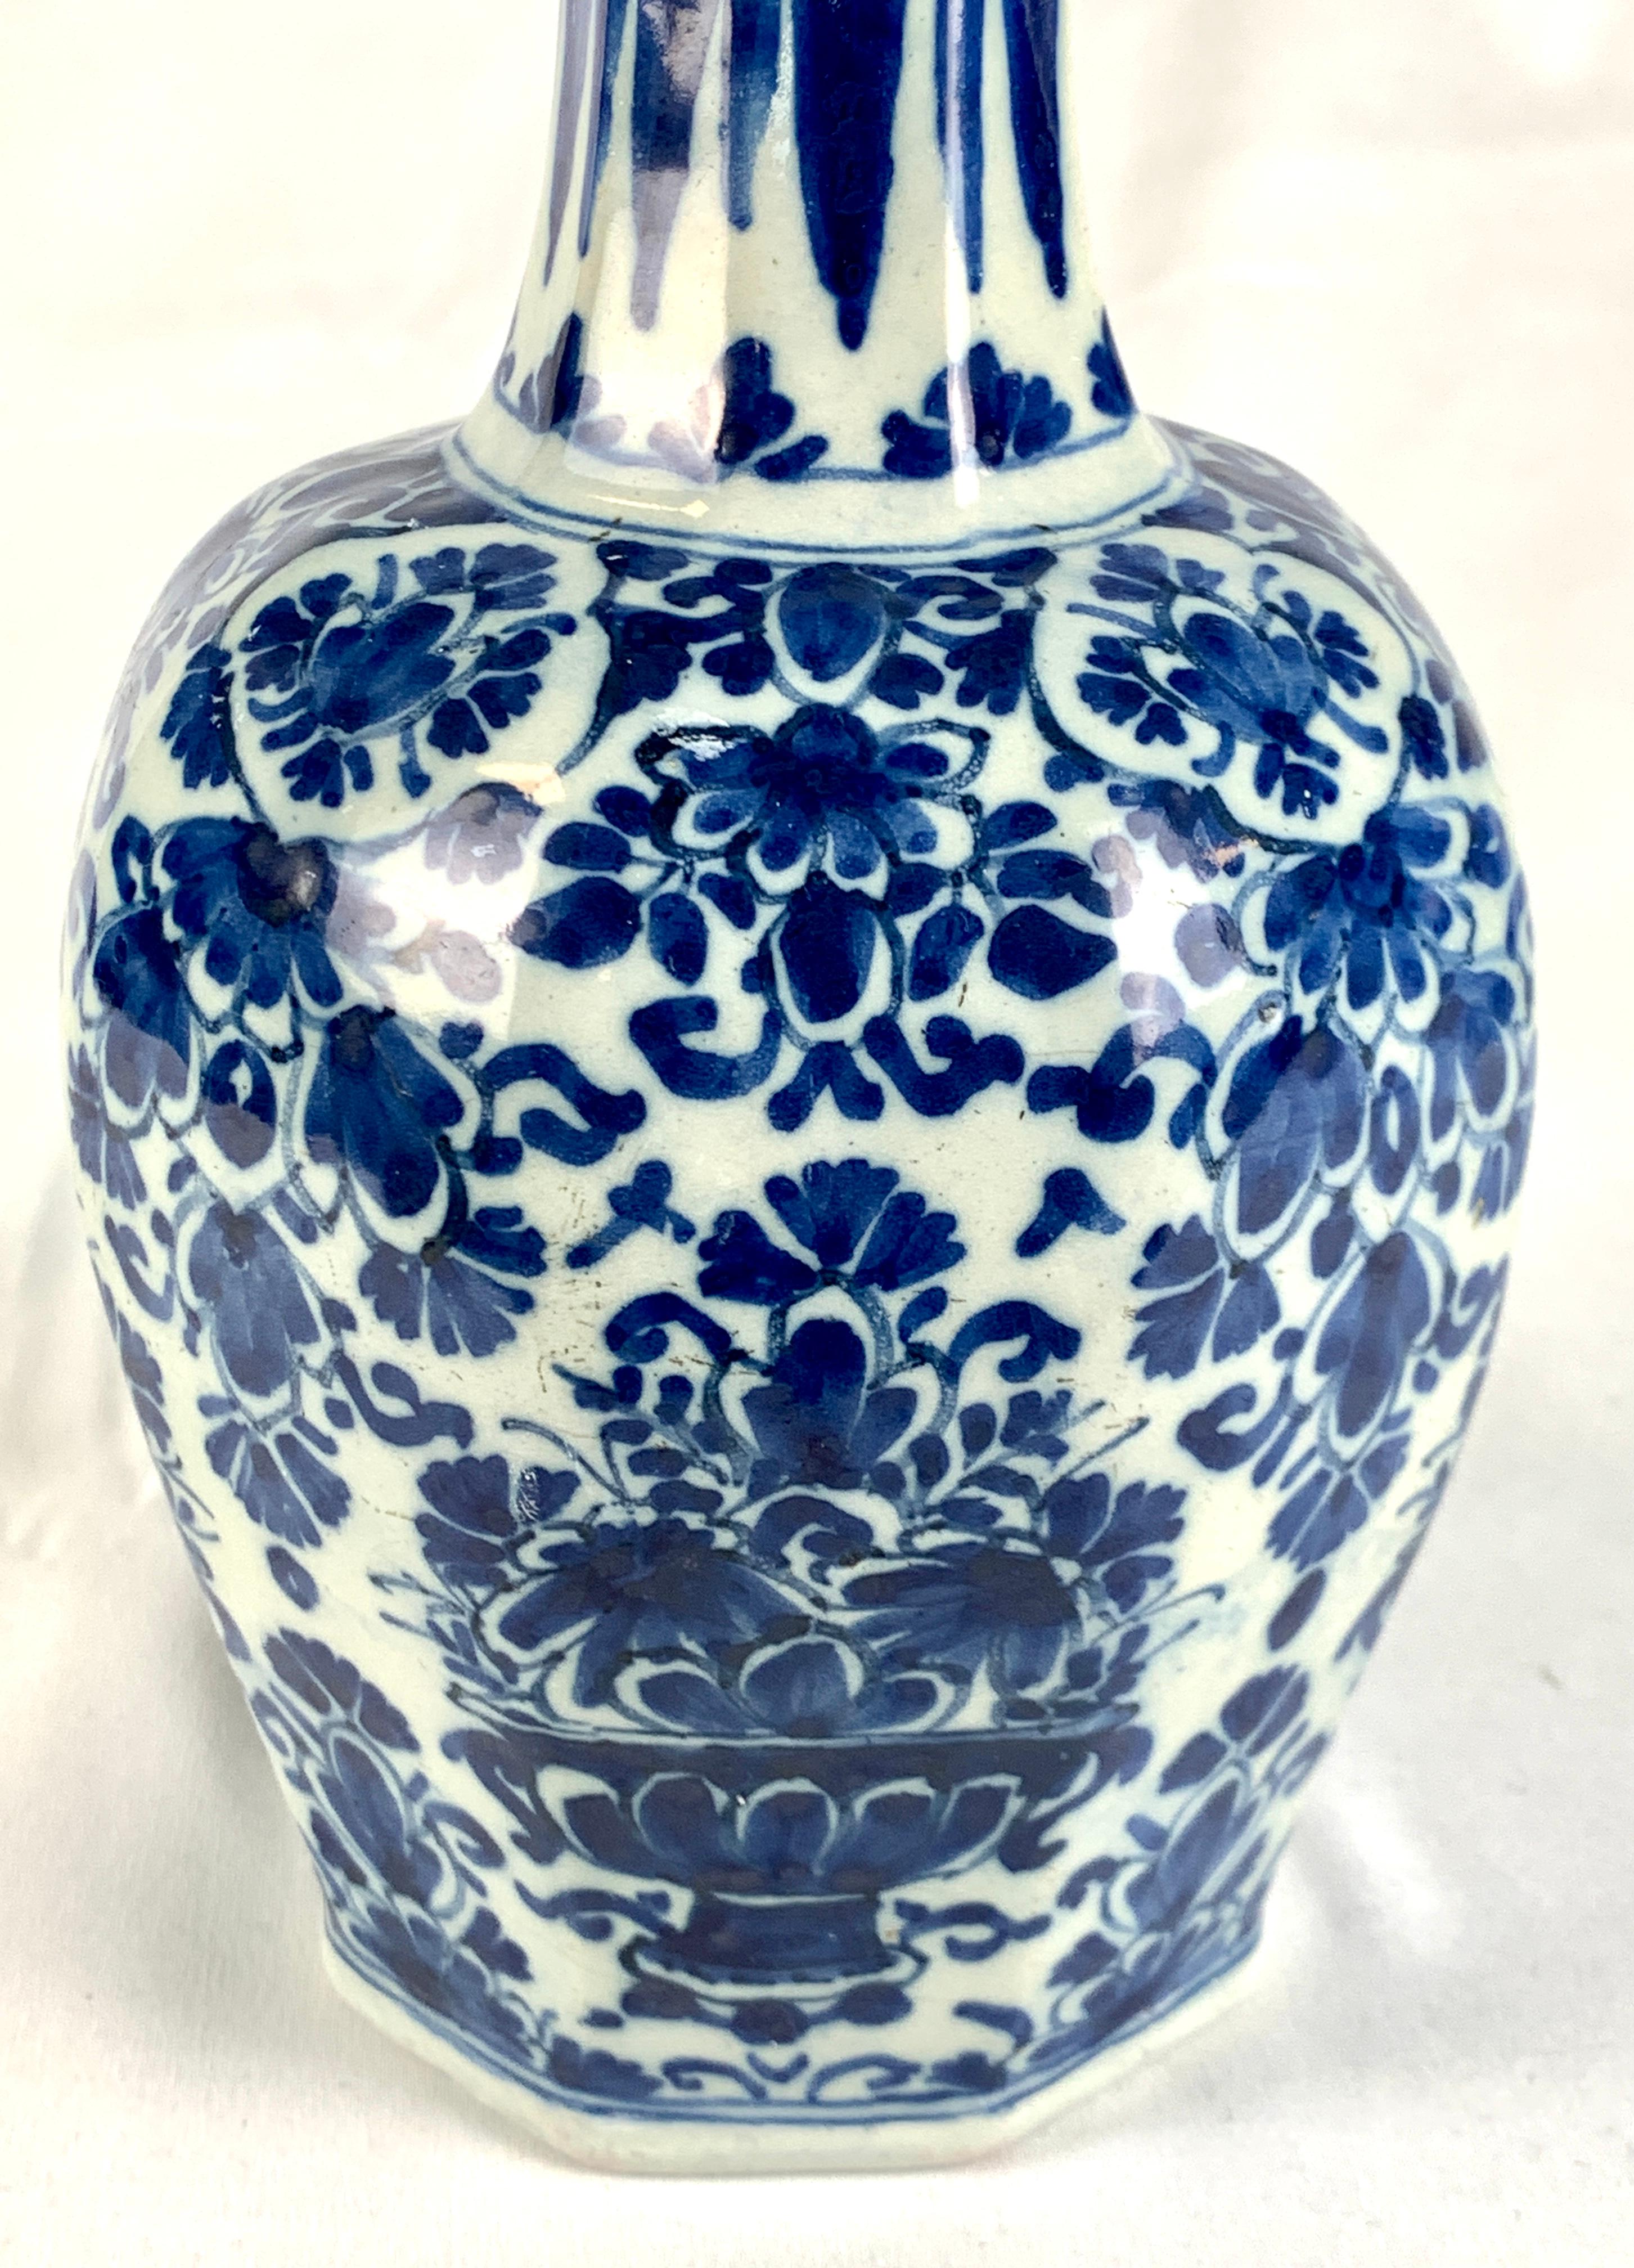 Made circa 1780, this 18th century Dutch Delft vase was hand painted with floral decoration of flowers and scrolling vines. 
A beautiful deep cobalt blue covers most of the surface.
The vase has a traditional Dutch Delft shape; an octagonal base